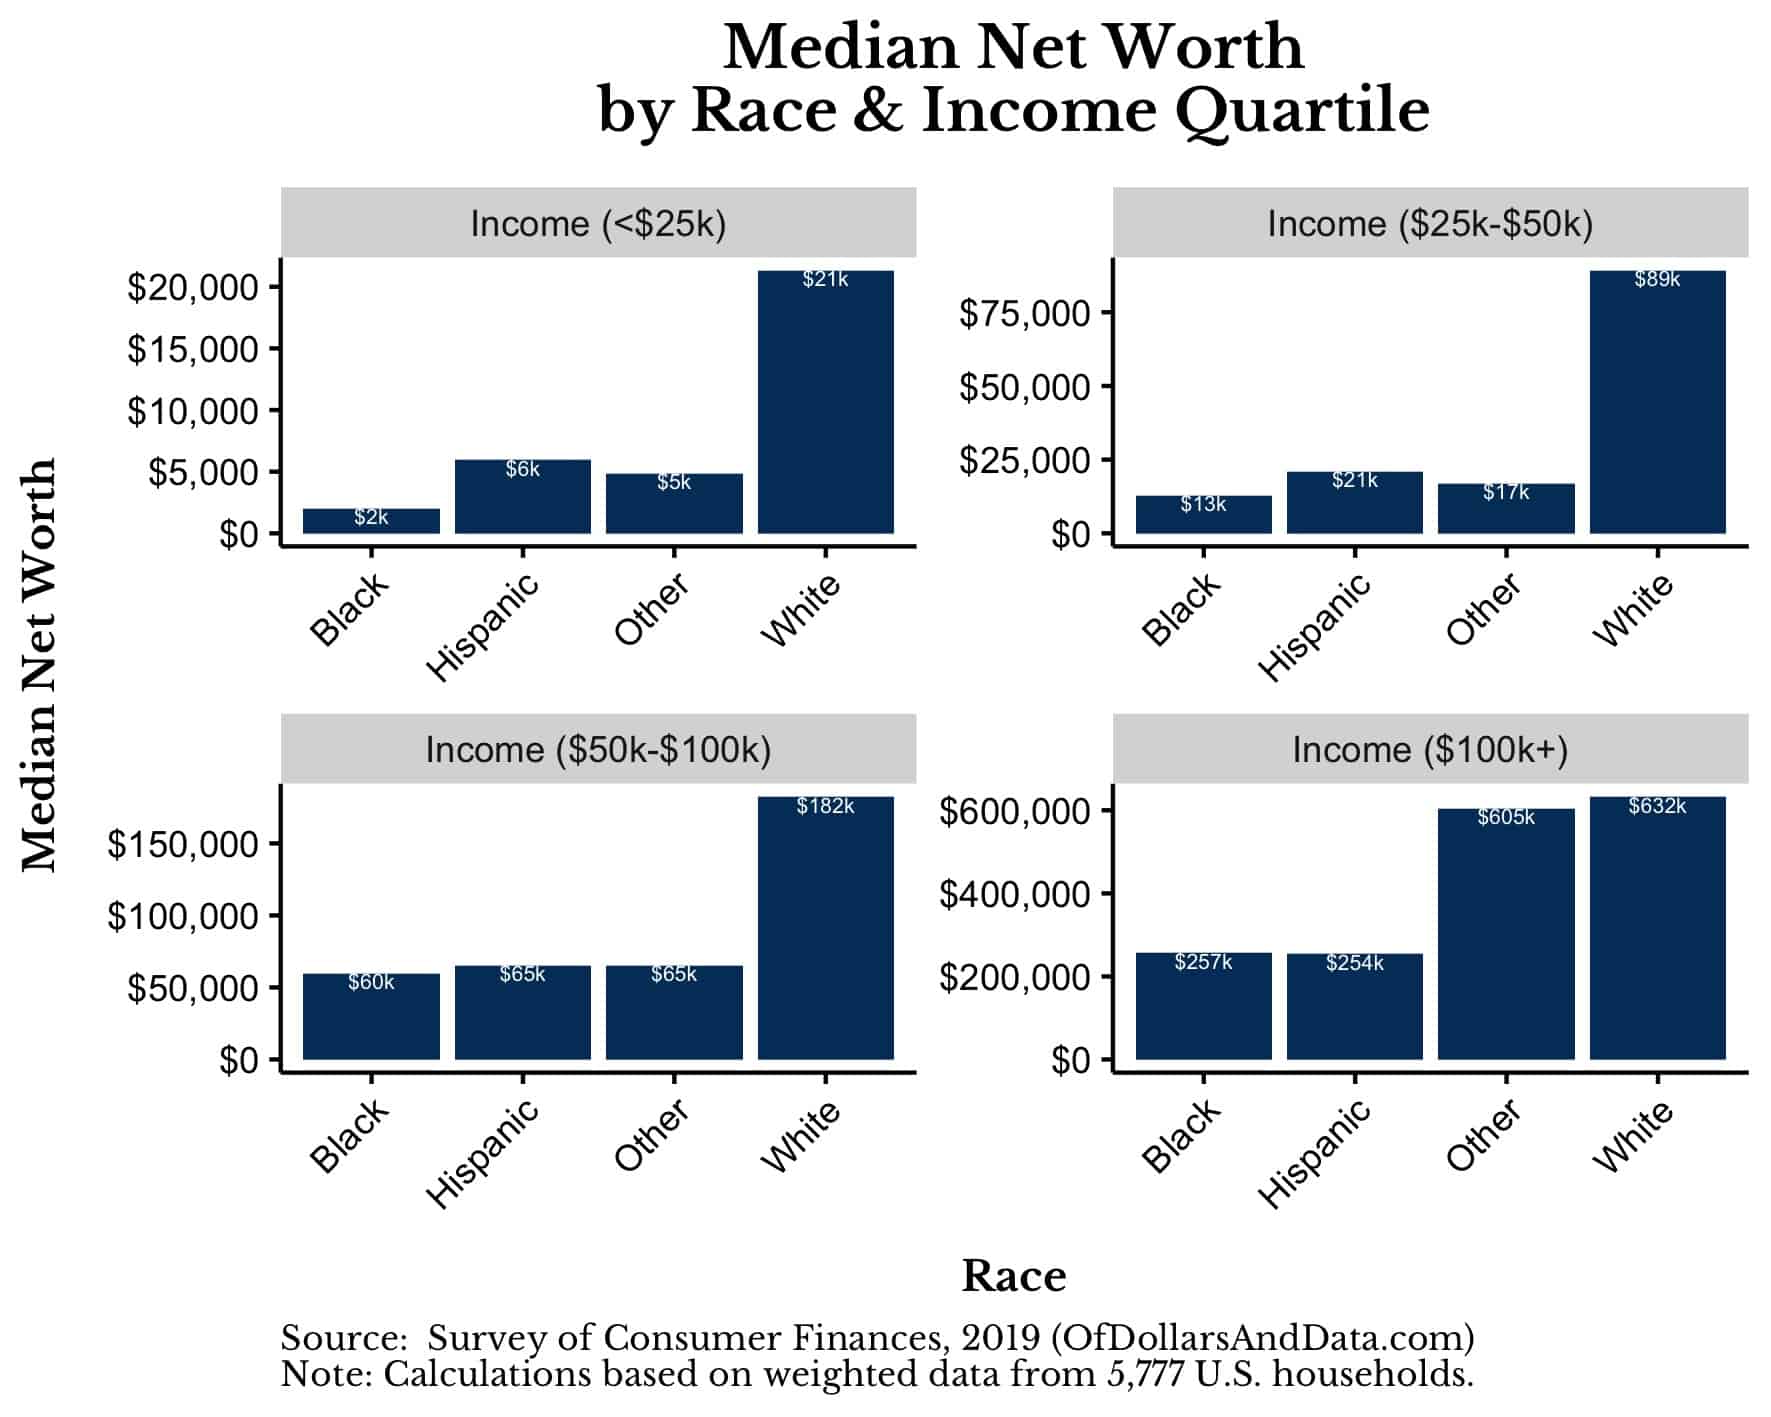 Median net worth by race and income quartile, 2019 Survey of Consumer Finances